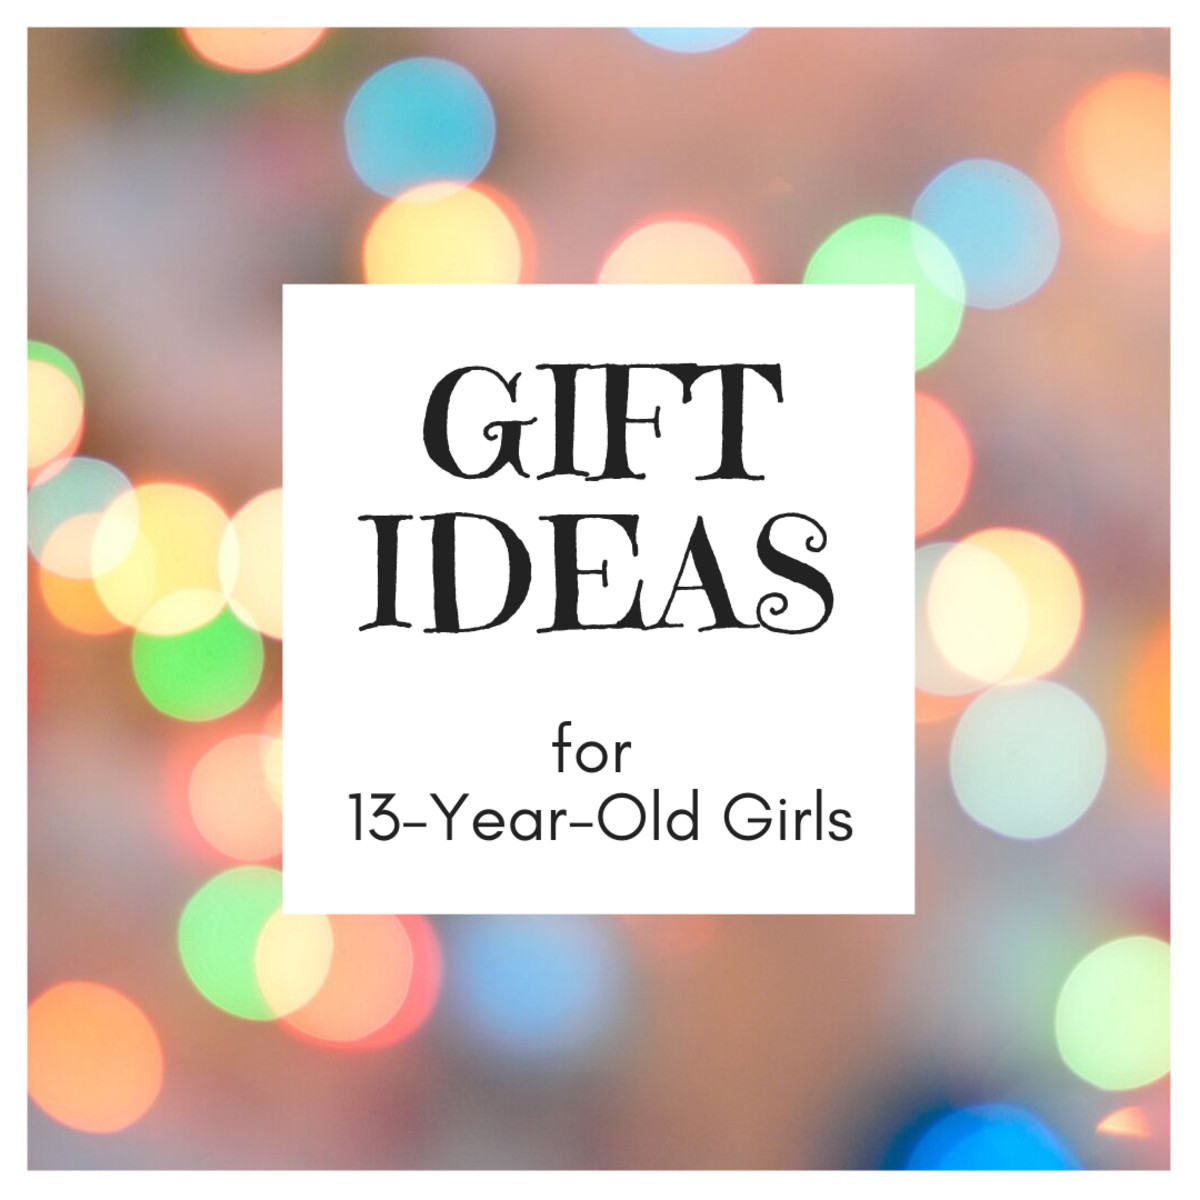 Gift Ideas For Girls Age 13
 Best Gift Ideas for 13 Year Old Girls